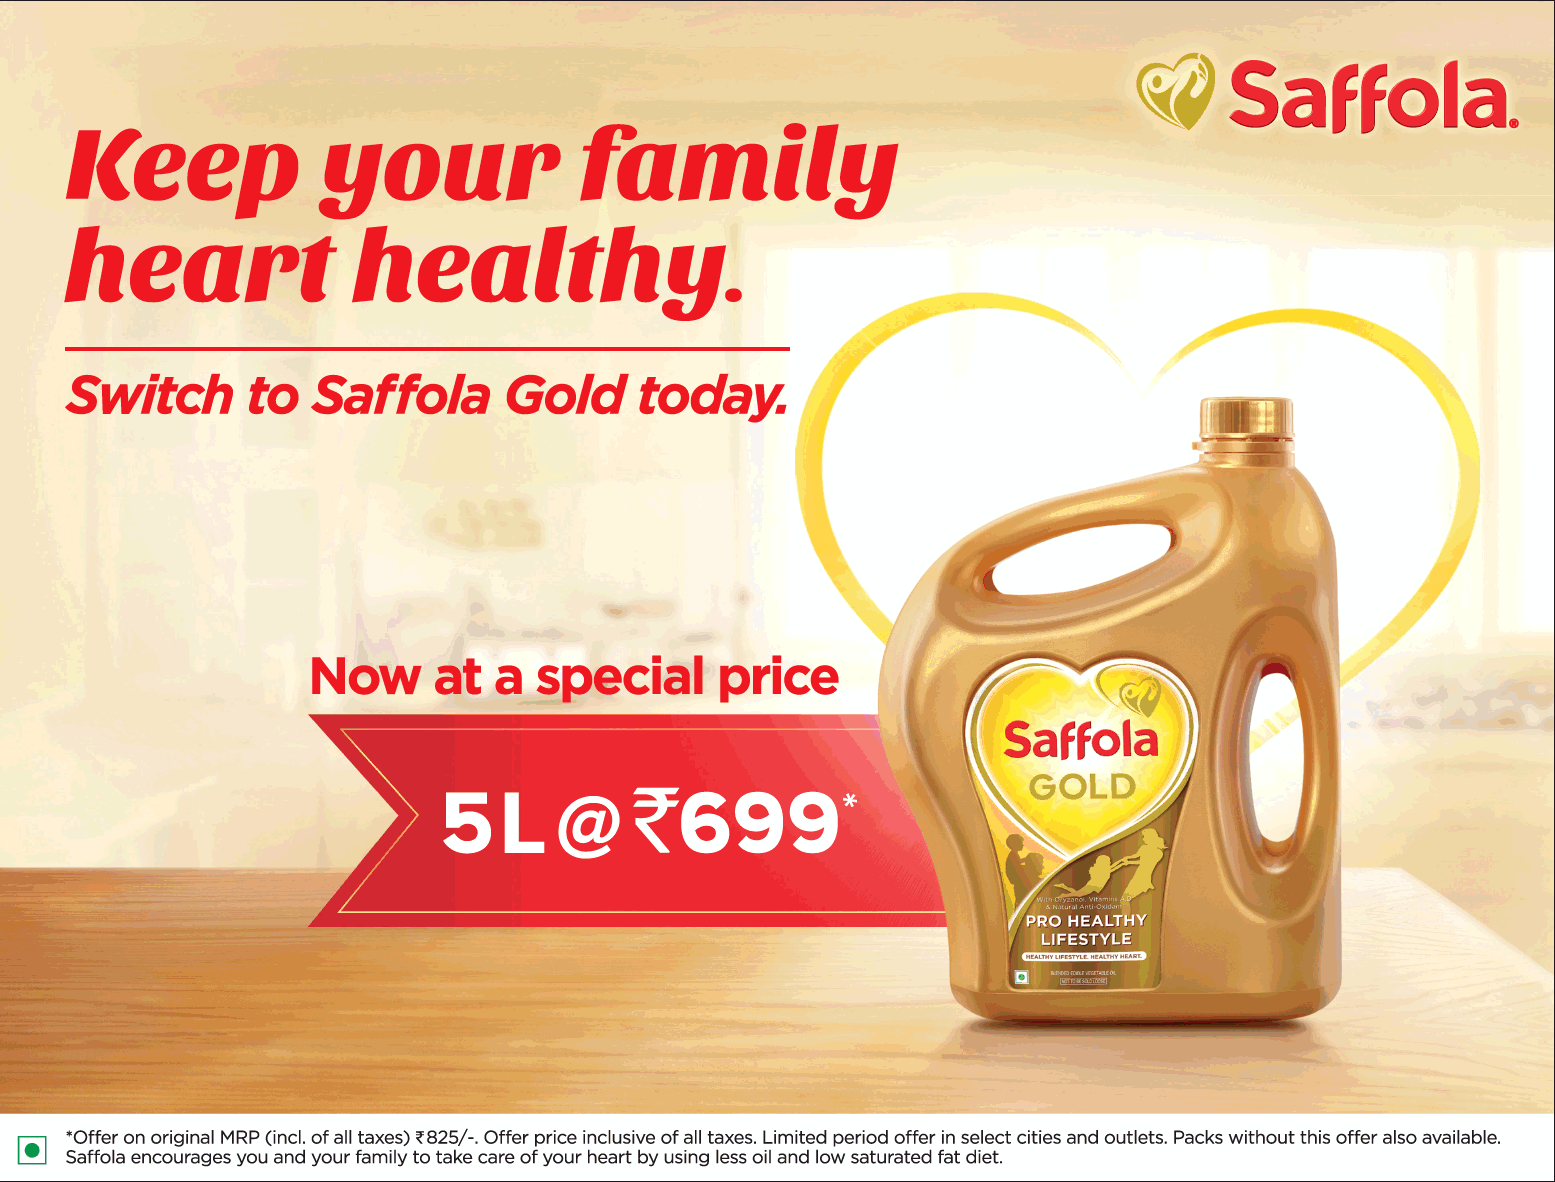 saffola-oil-now-at-special-price-5l-at-rs-699-ad-times-of-india-mumbai-30-06-2019.png